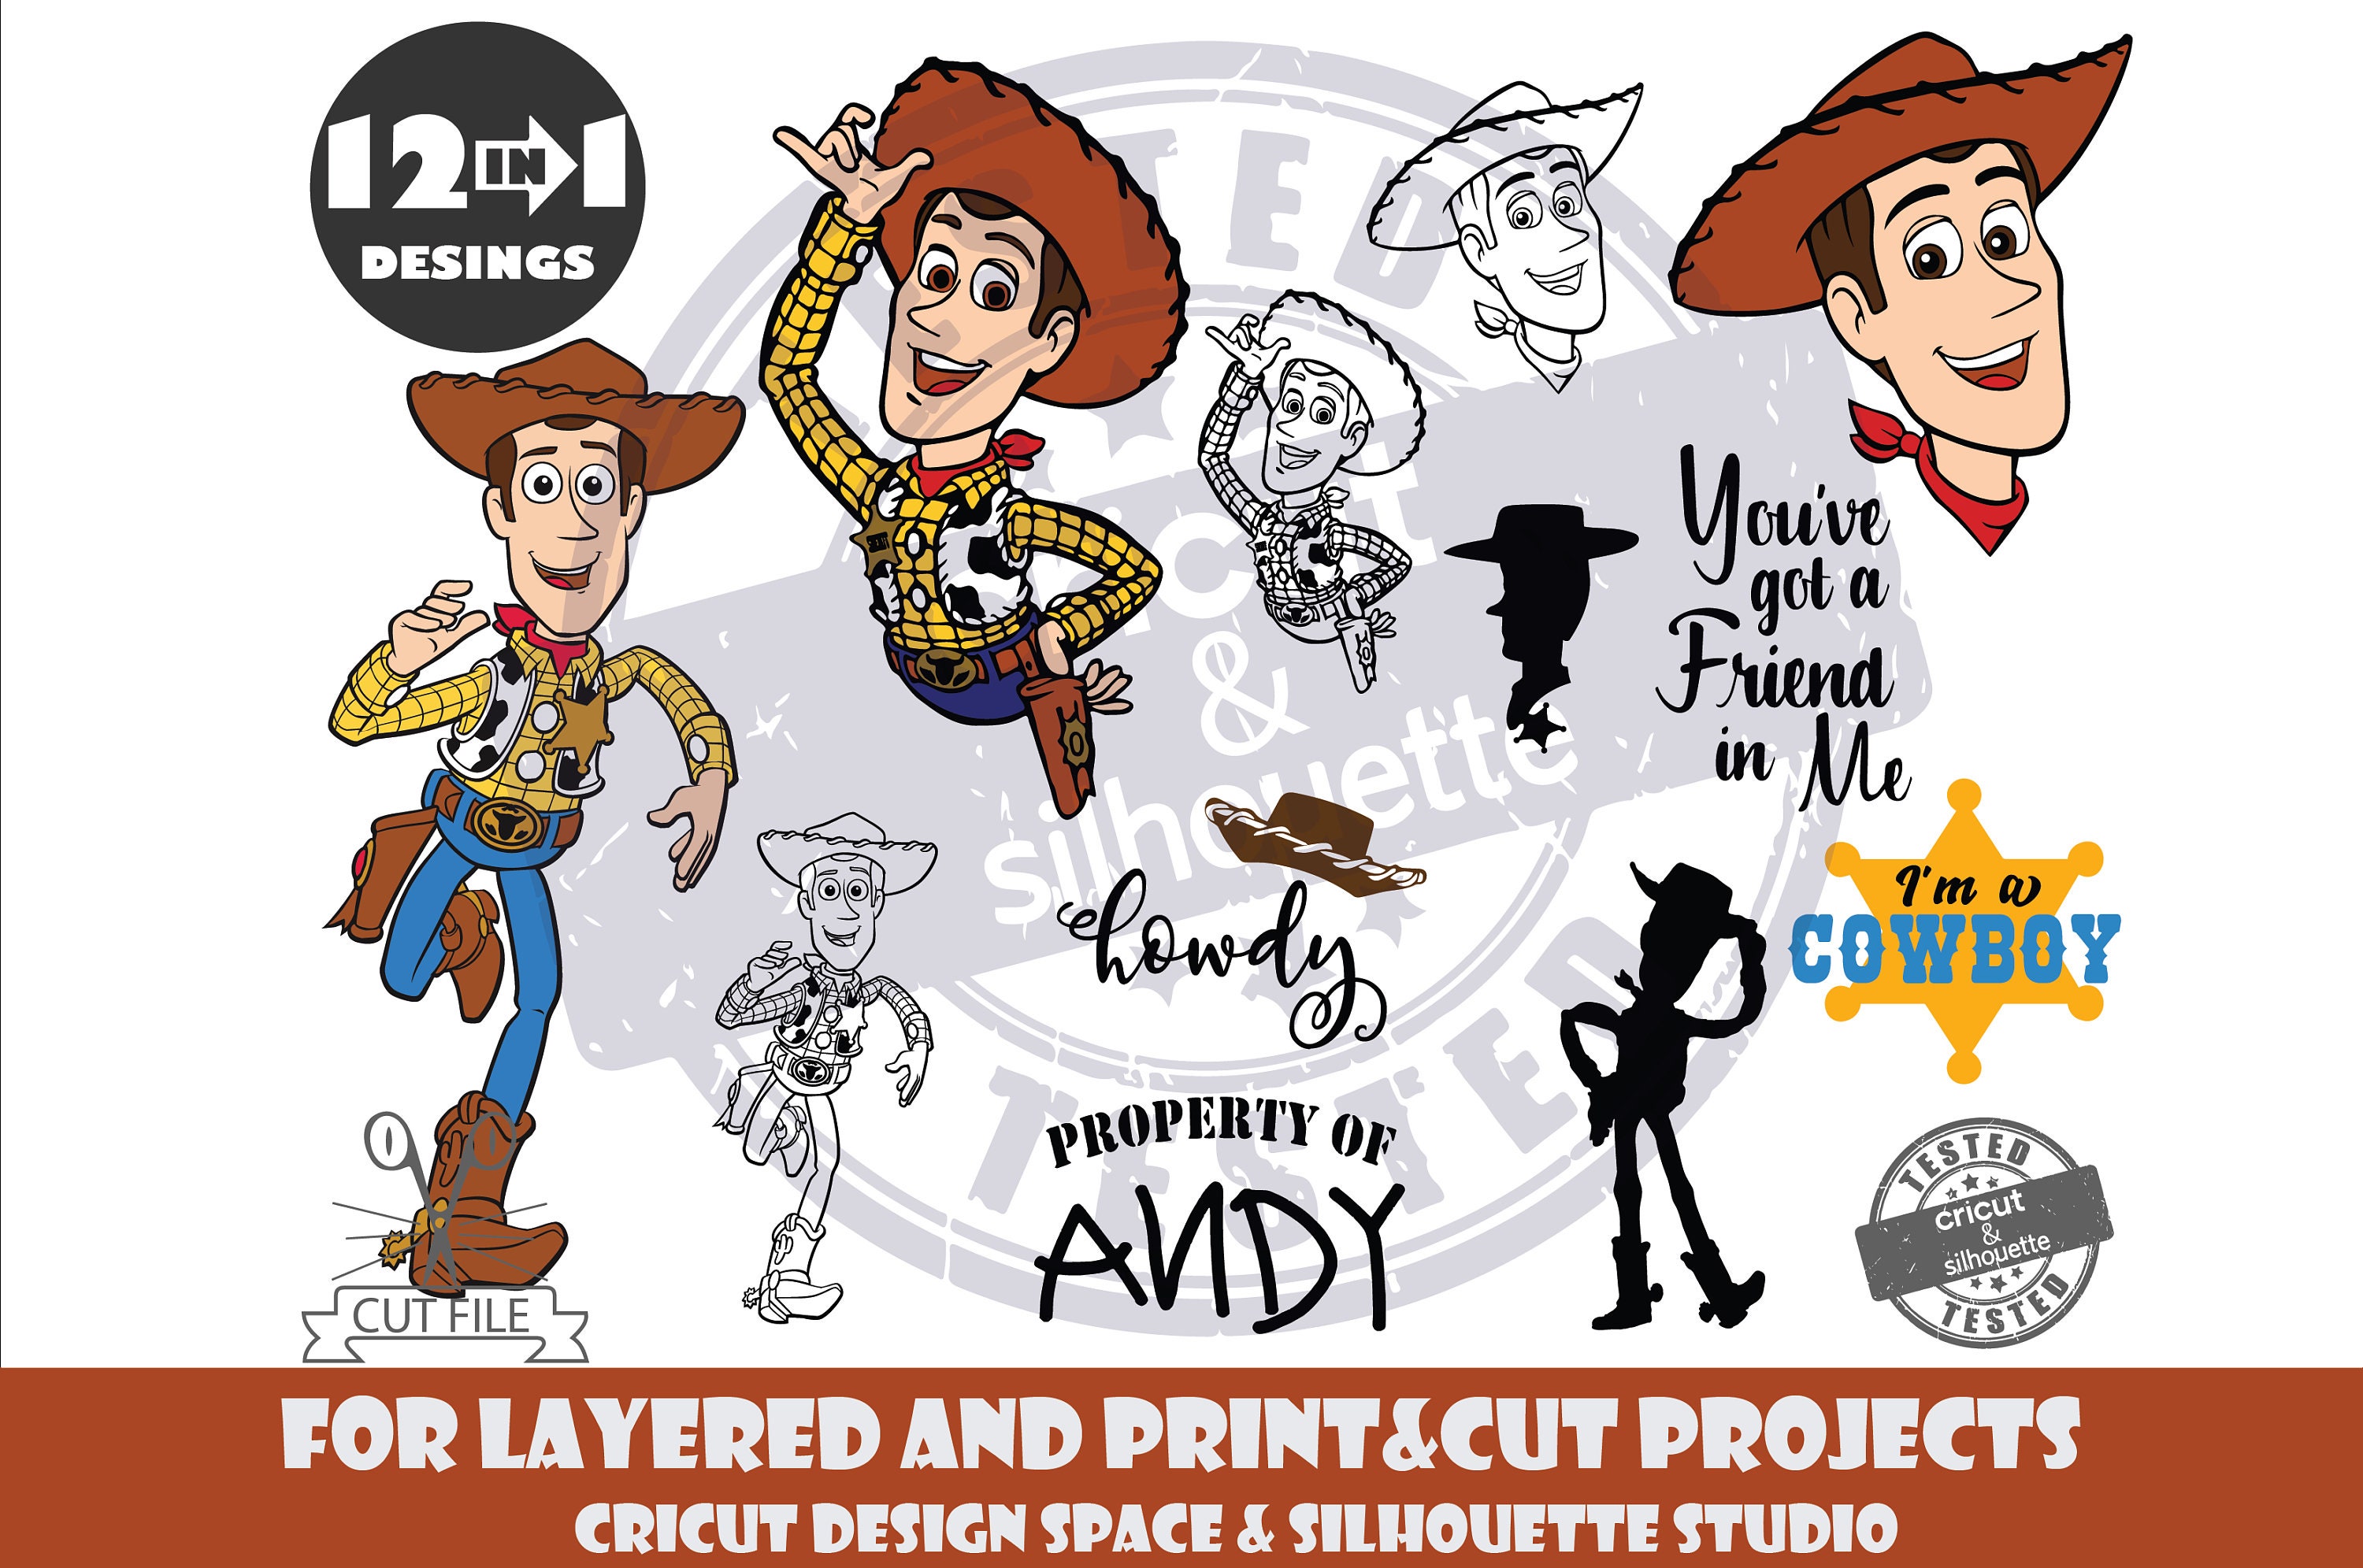 Forky SVG, toy story files, cricut files, layered cut, woody and buzz, zero  forks given, for shirts, decals